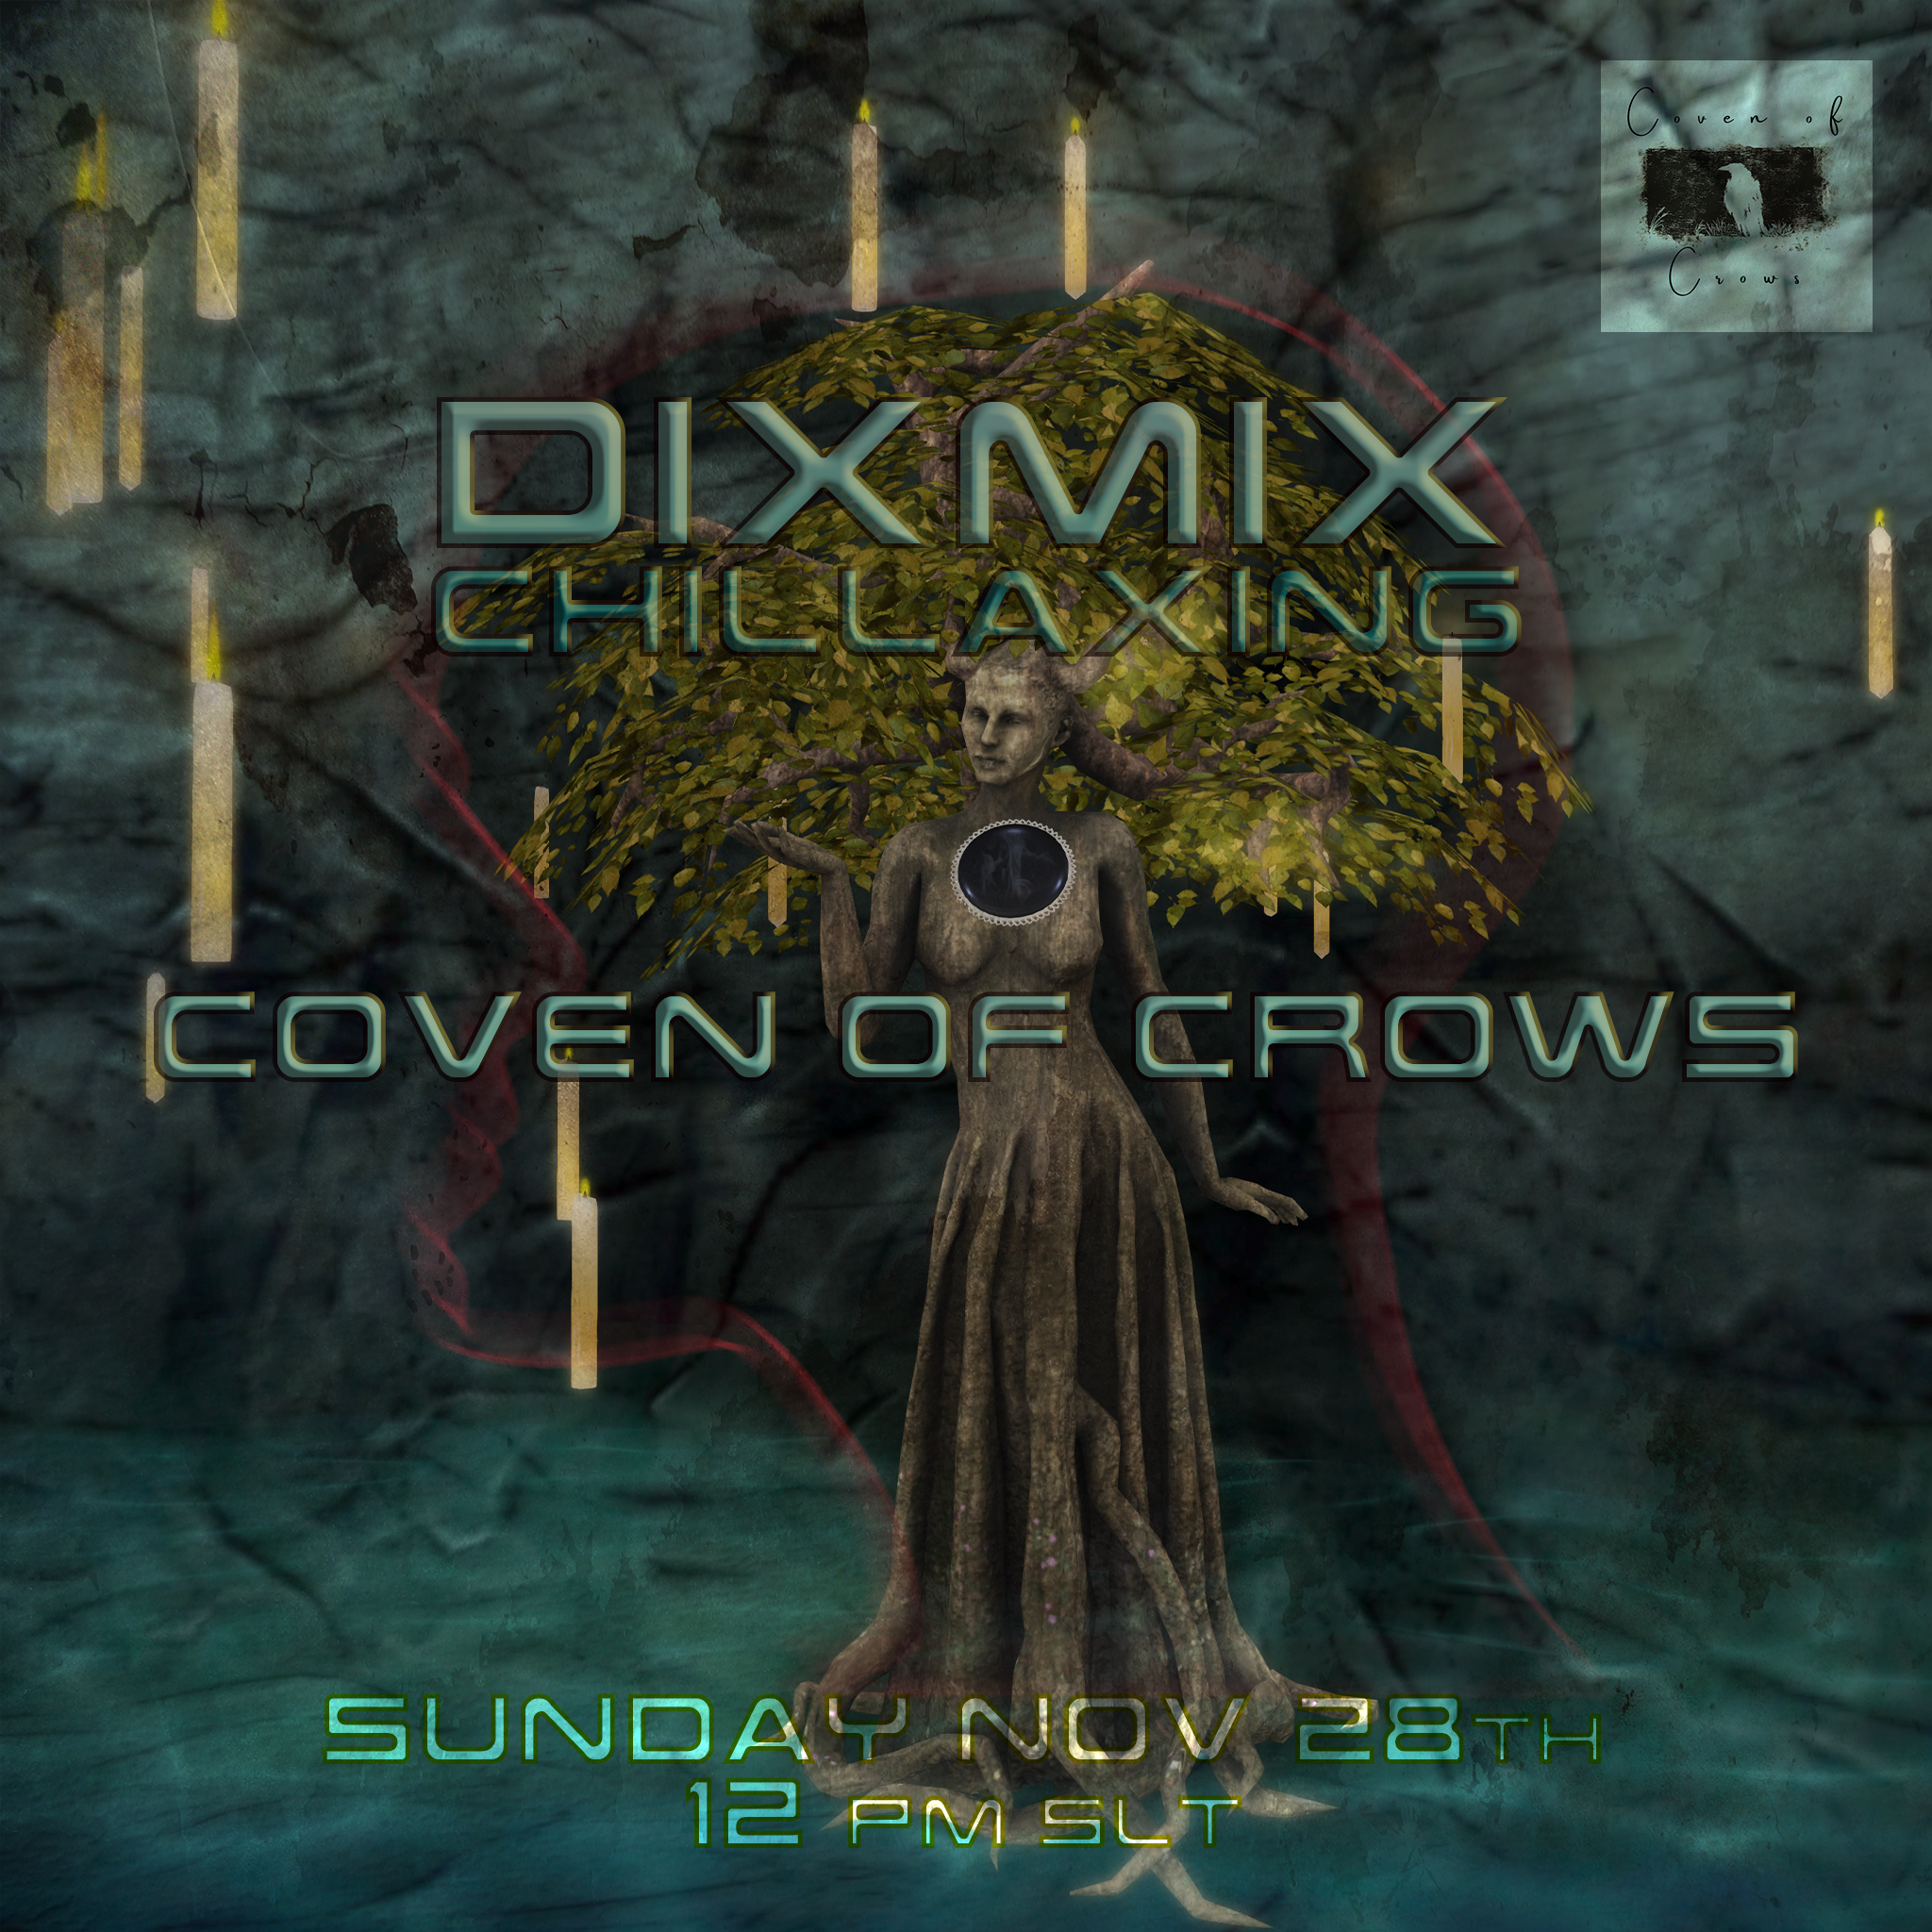 DiXmiX at the mystical Coven of Crows